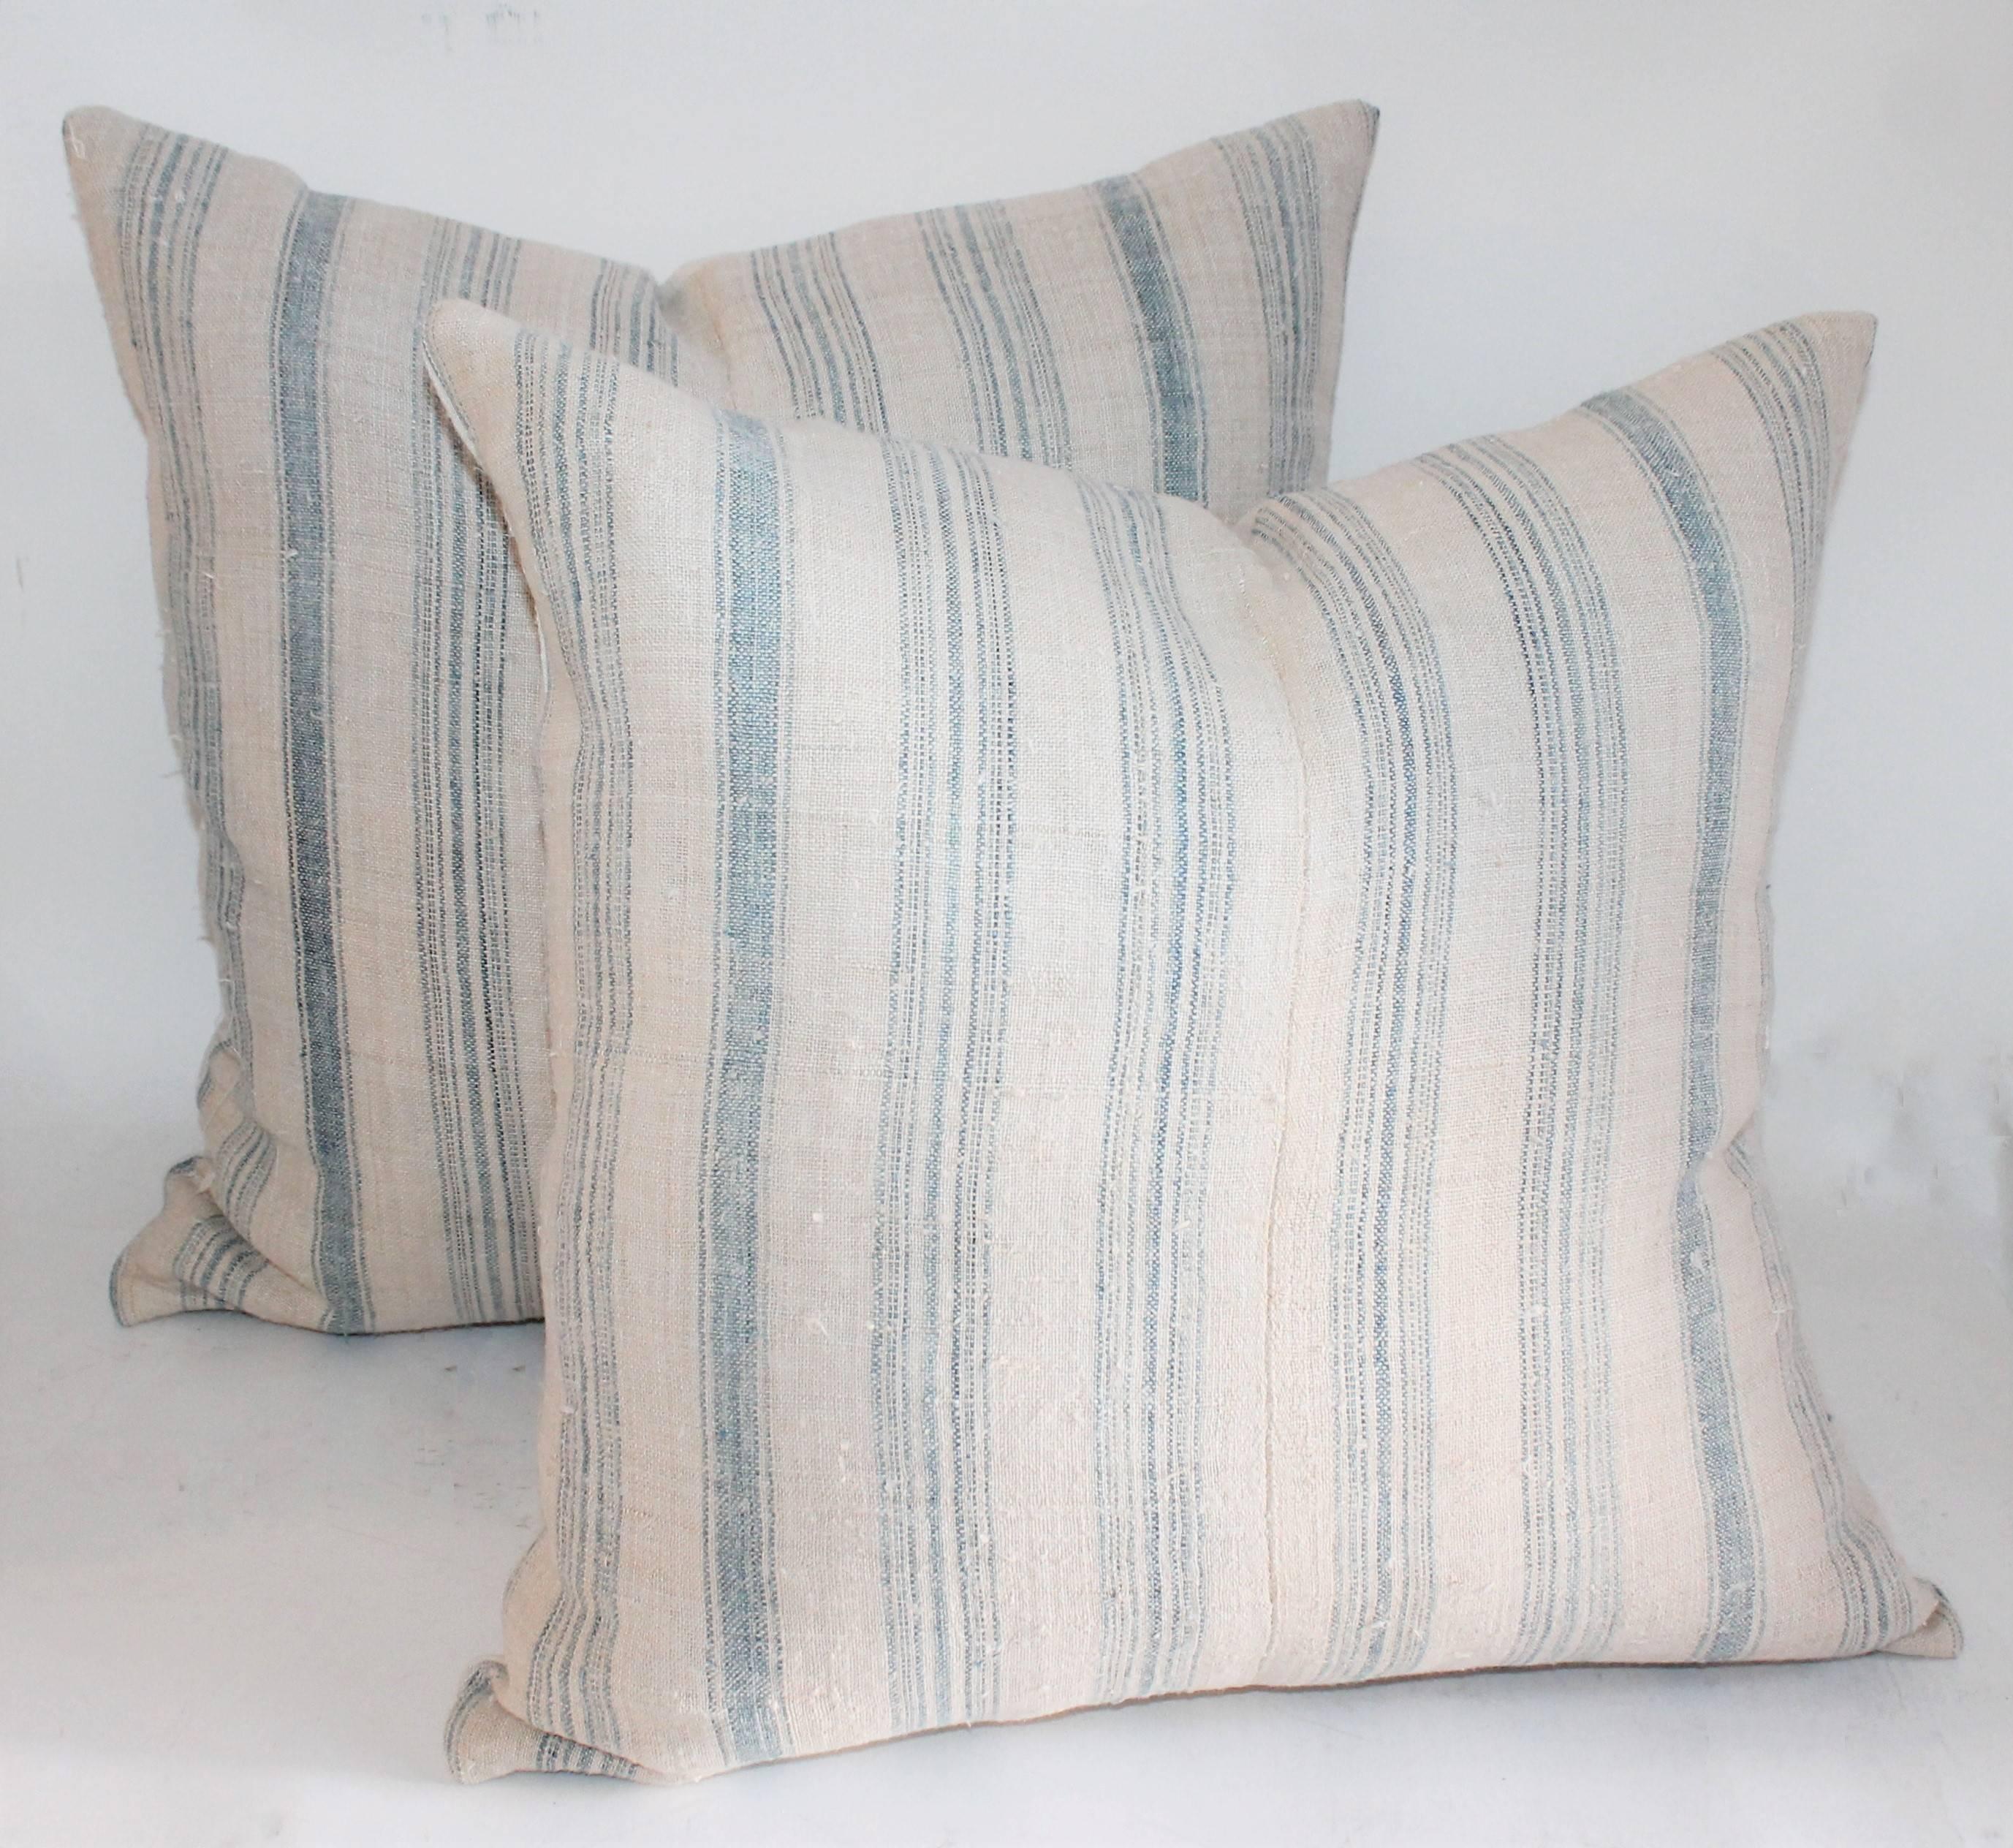 We have two vintage pairs of light blue and white ticking pillows in great condition. This set of four pillows are professionally laundered and have been fitted with down and feather inserts. All pillows are made in house. Sold as a group of four.